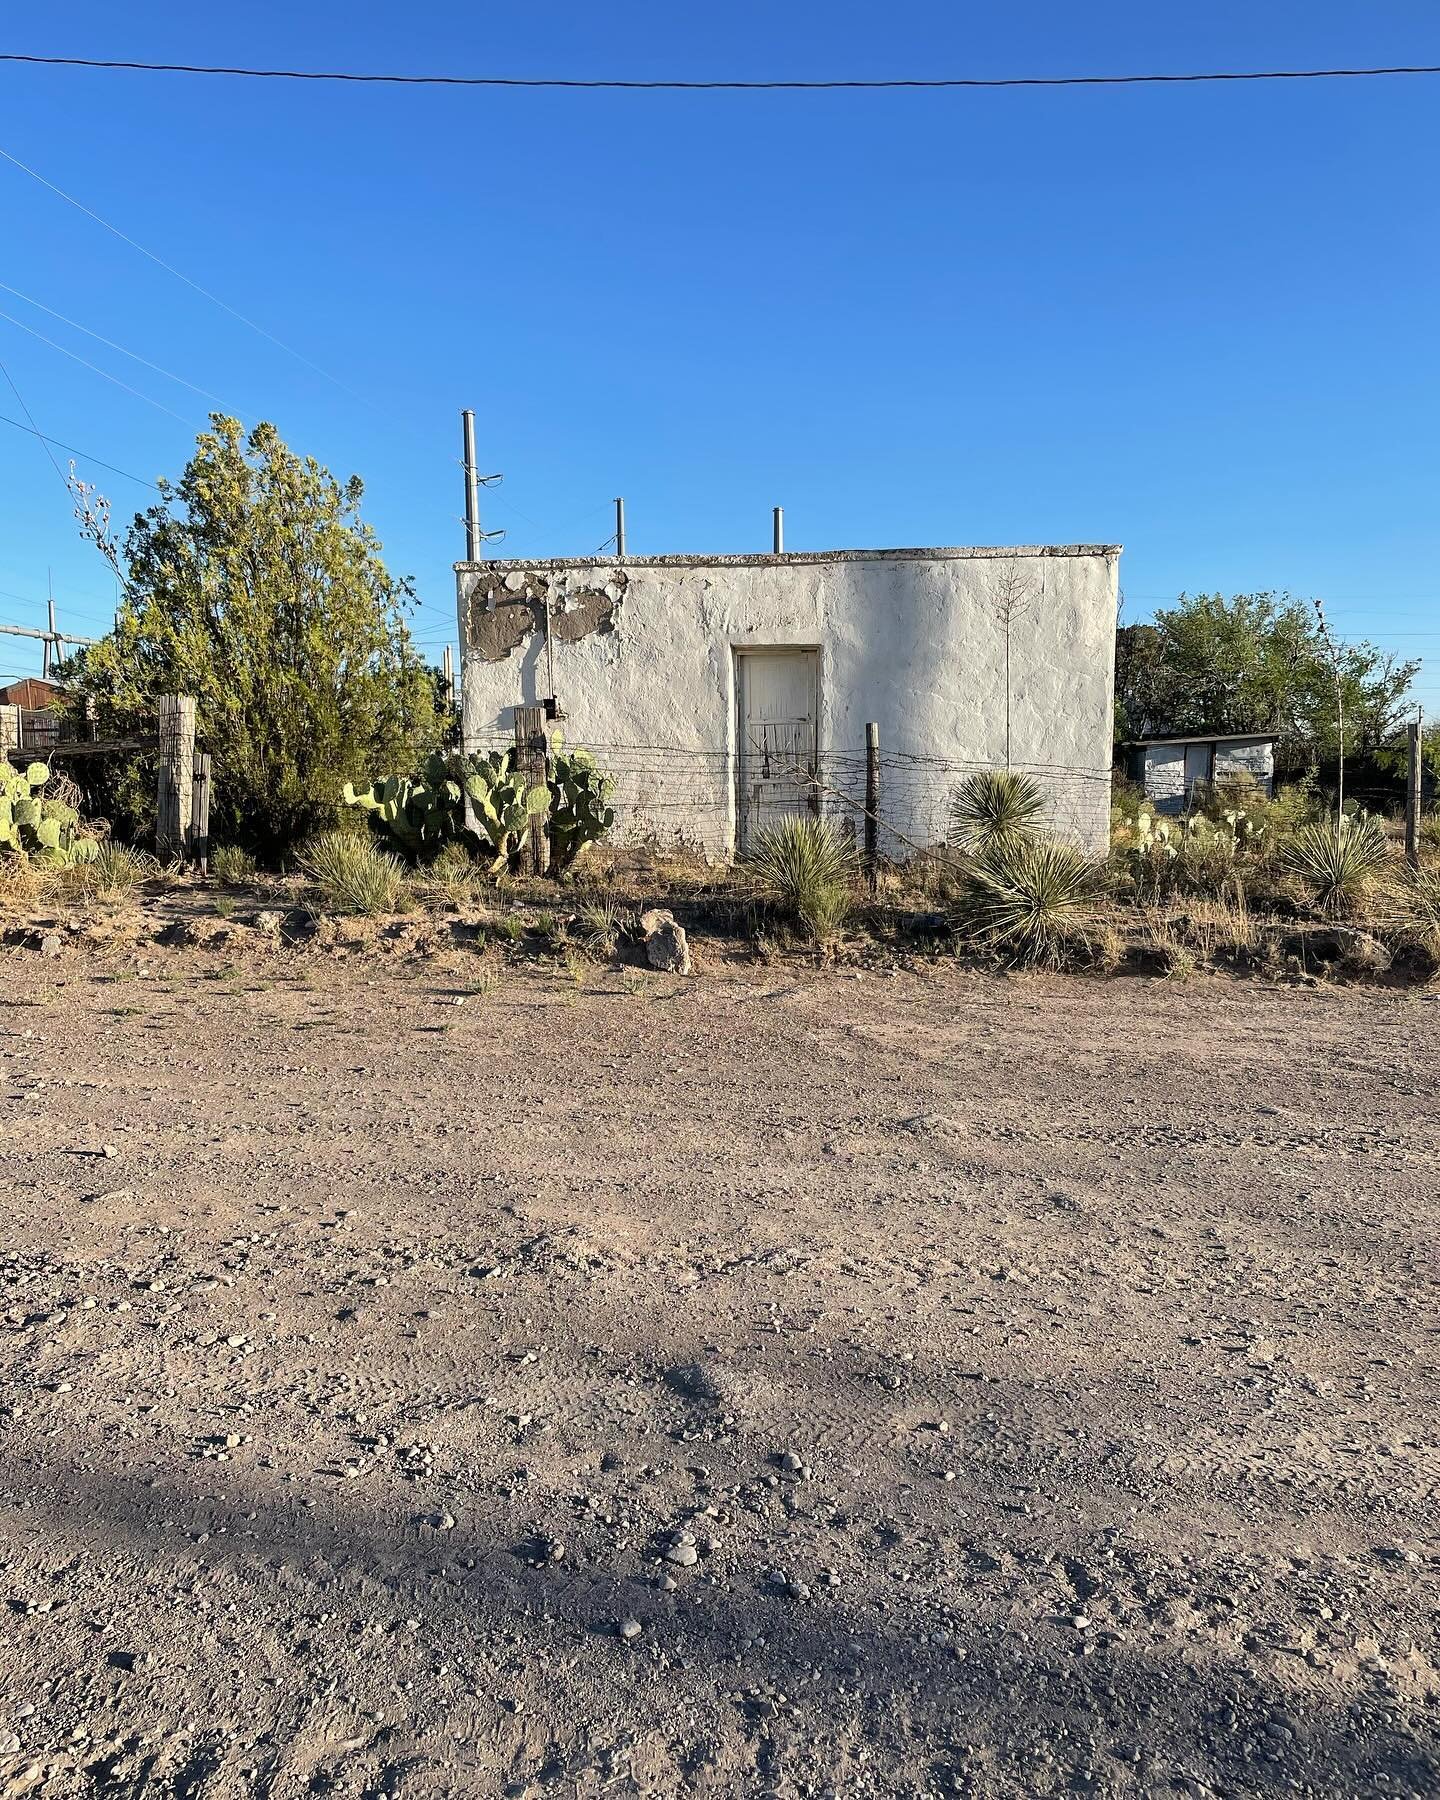 E Columbia &amp; Ave E / Sal Si Puedes / Marfa / 3 Lots compiling .4 Acres of land / 2 adobes with 2 sheds the topography is low to high / price can&rsquo;t beat $120,000 @intag2336 #MarfaRealtyBroker #MarfaRealty #MarfaModern #Highdesertdwellings #M